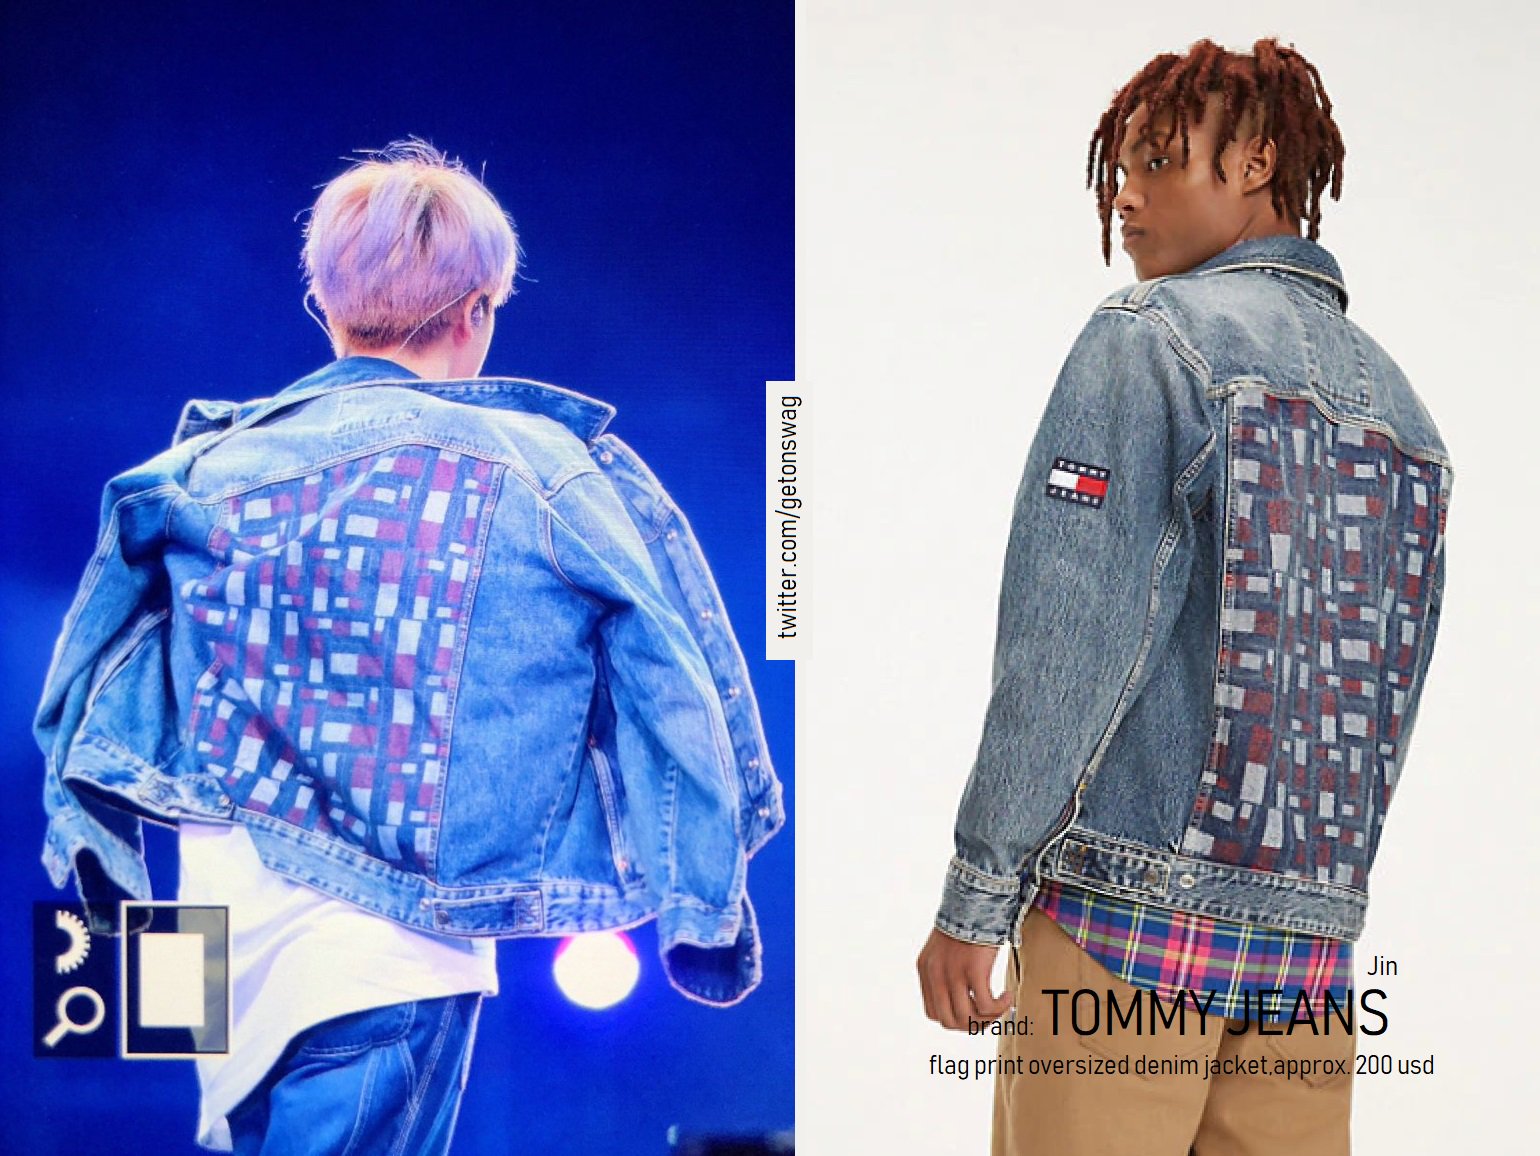 Beyond The Style ✼ Alex ✼ on X: #Jungkook 190615 #BTS 5th Muster in Busan  #방탄소년단 POLO RALPH LAUREN - Limited-Edition Denim Jacket   / X